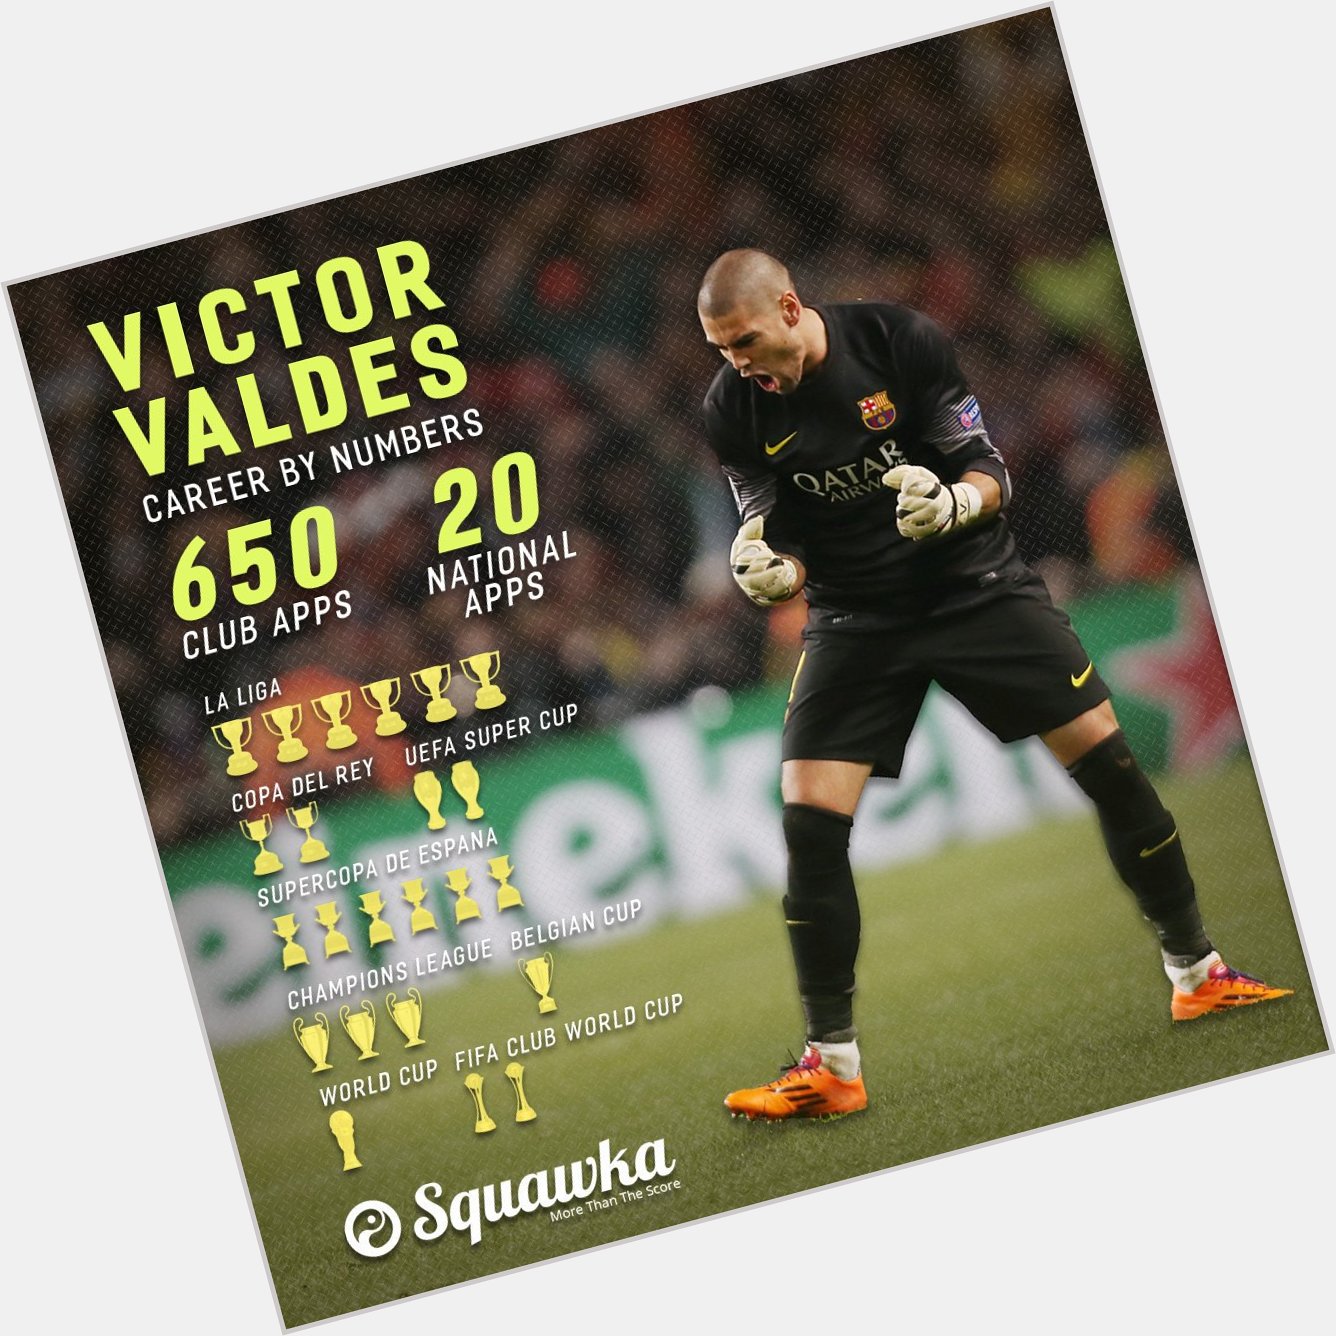 Happy 37th birthday Víctor Valdés.

Not many can boast a better collection of trophies. 